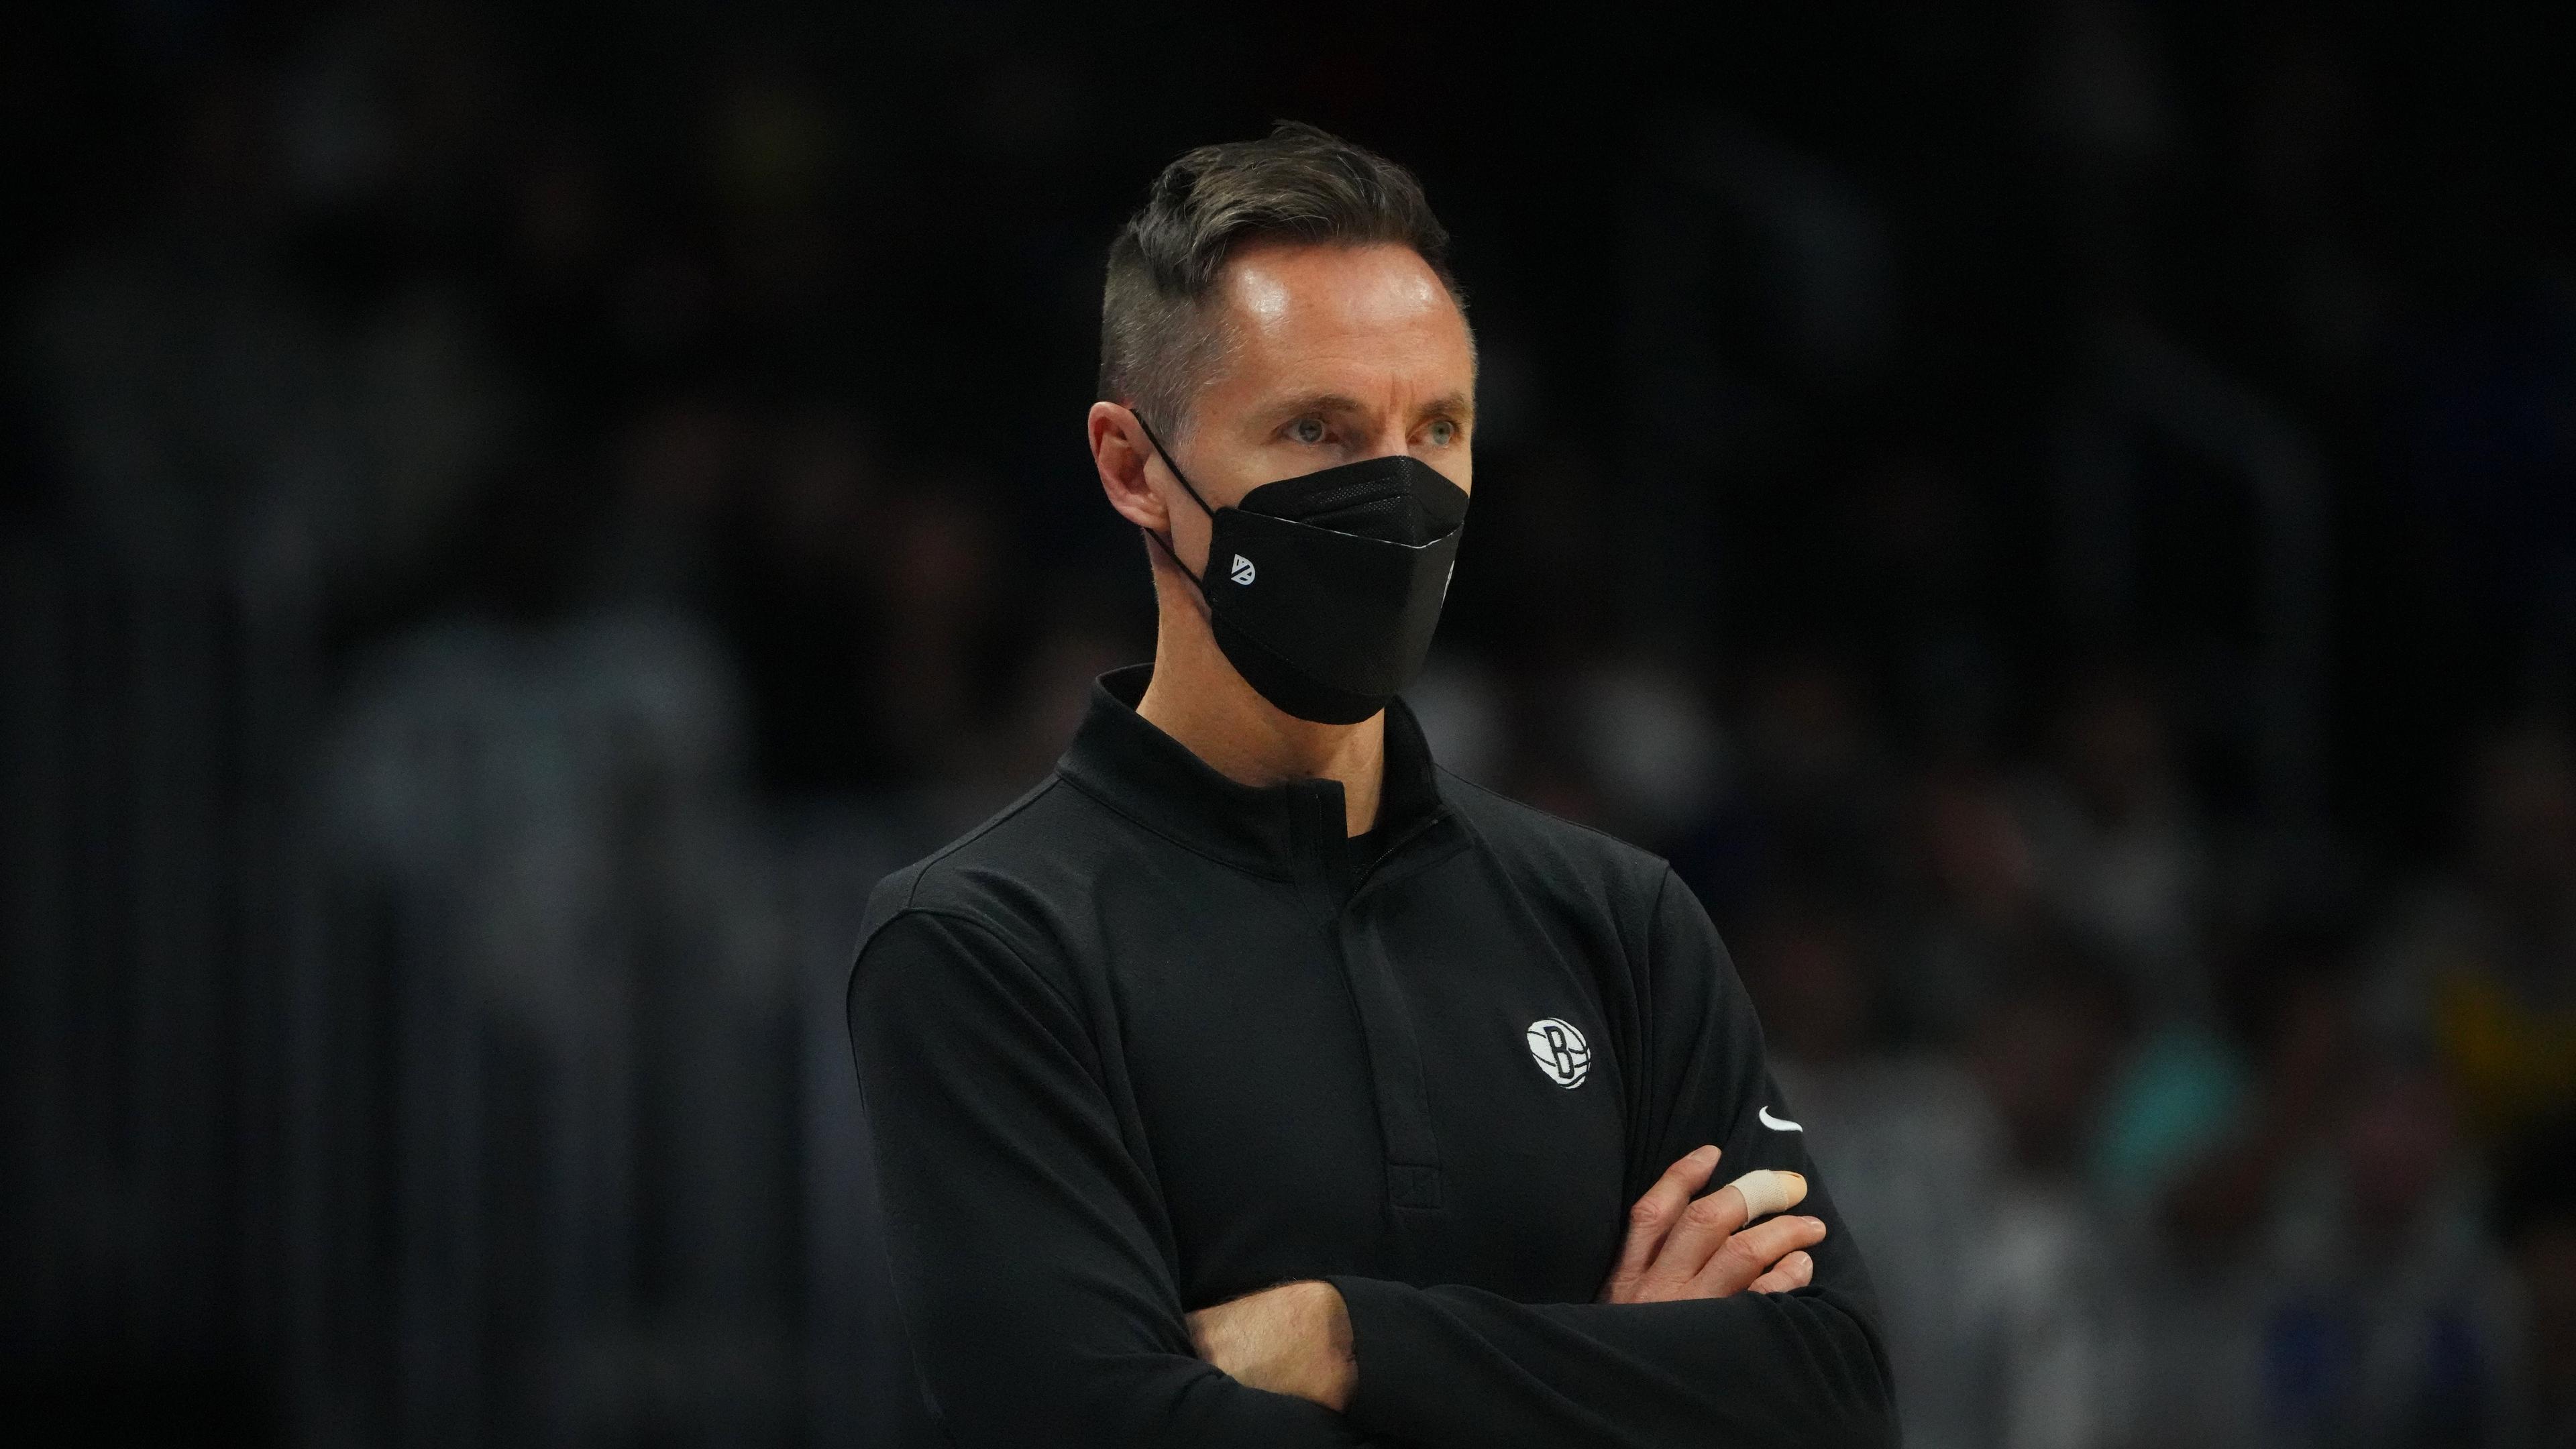 Feb 6, 2022; Denver, Colorado, USA; Brooklyn Nets head coach Steve Nash during the the second half against the Denver Nuggets at Ball Arena. Mandatory Credit: Ron Chenoy-USA TODAY Sports / Ron Chenoy-USA TODAY Sports